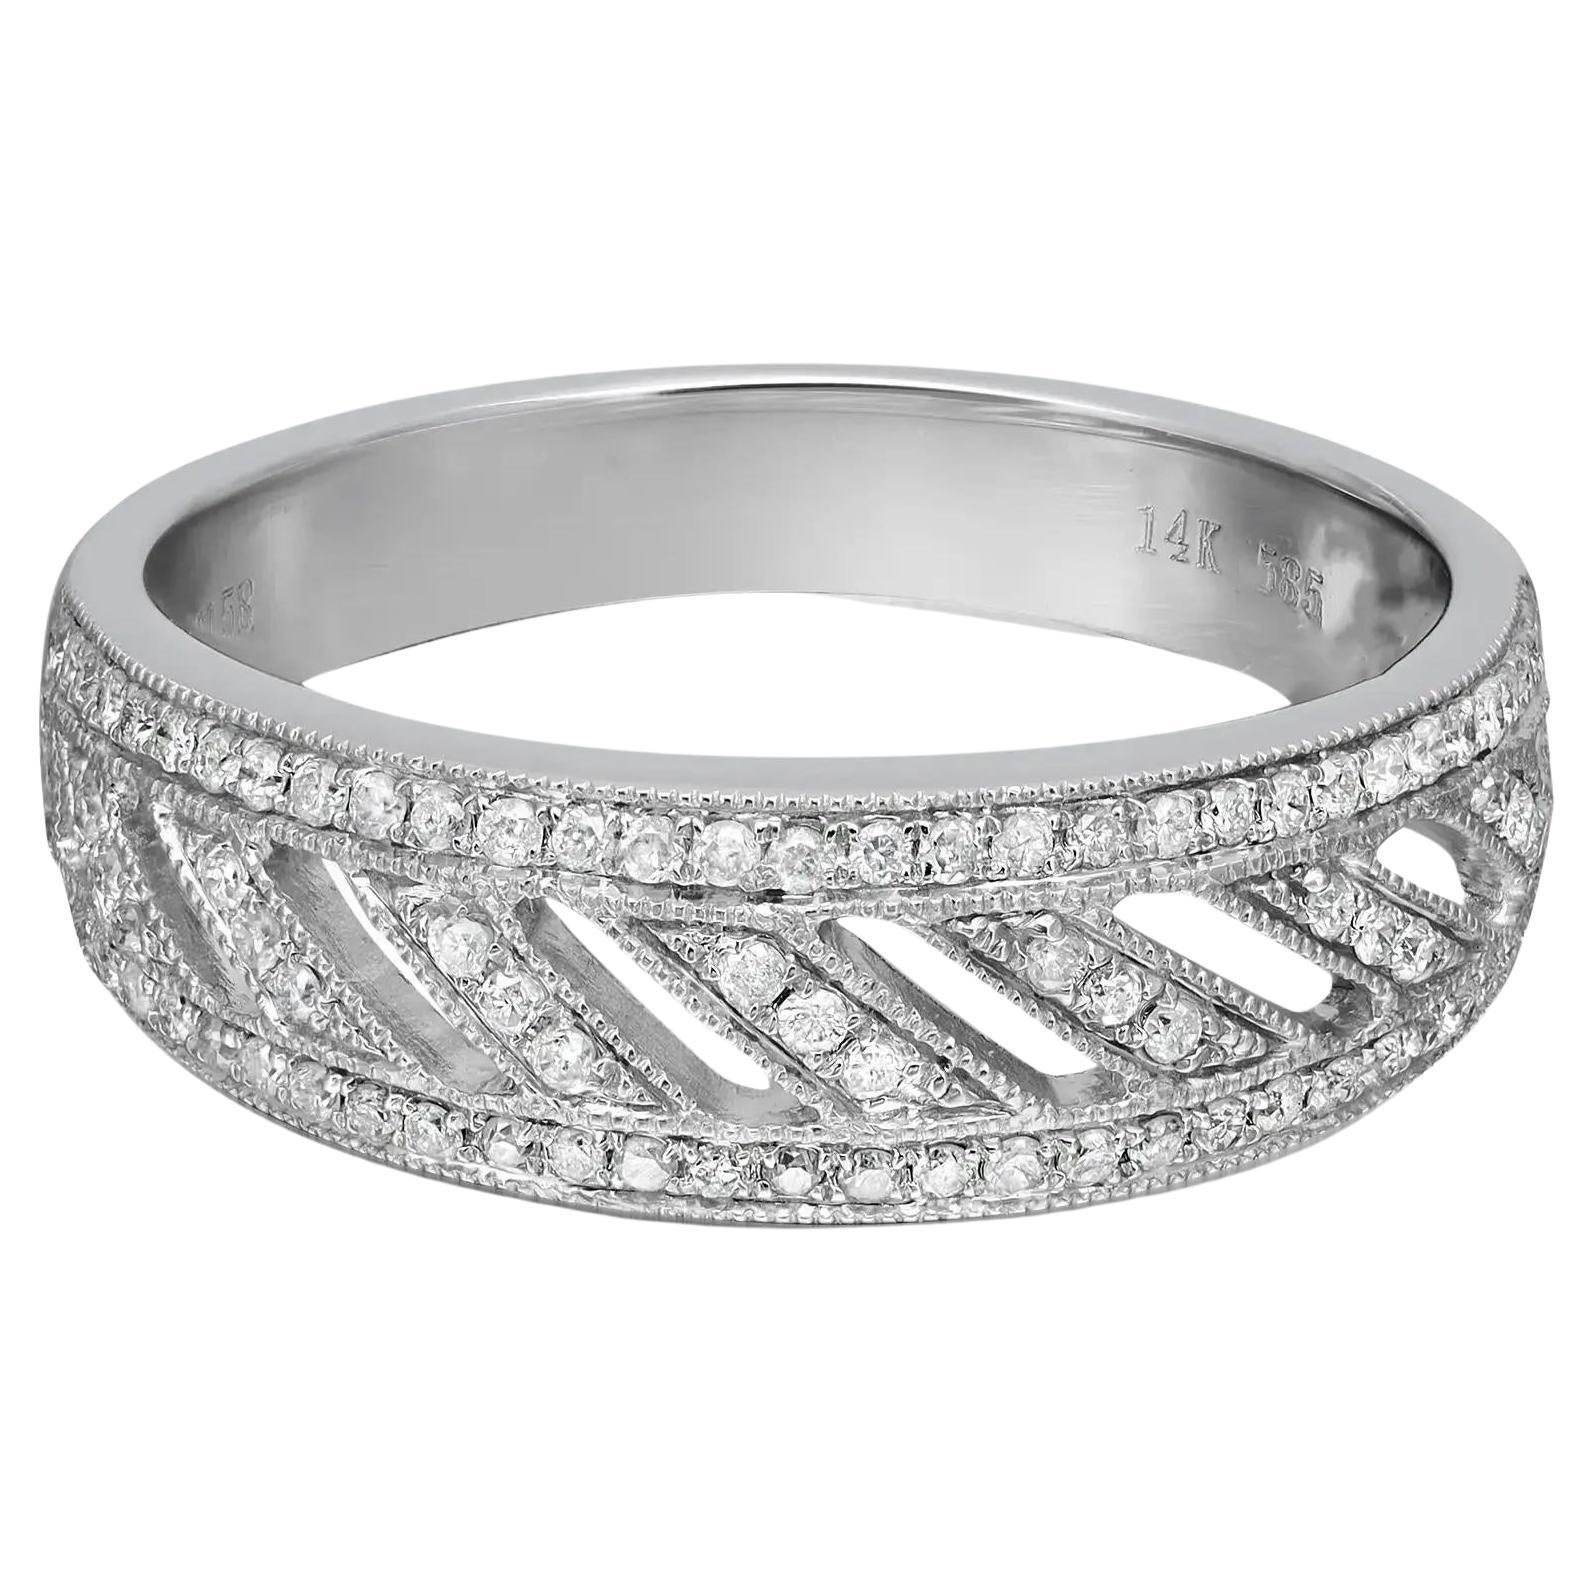 0.29cttw Pave Set Round Cut Diamond Ladies Band Ring 14k White Gold For Sale